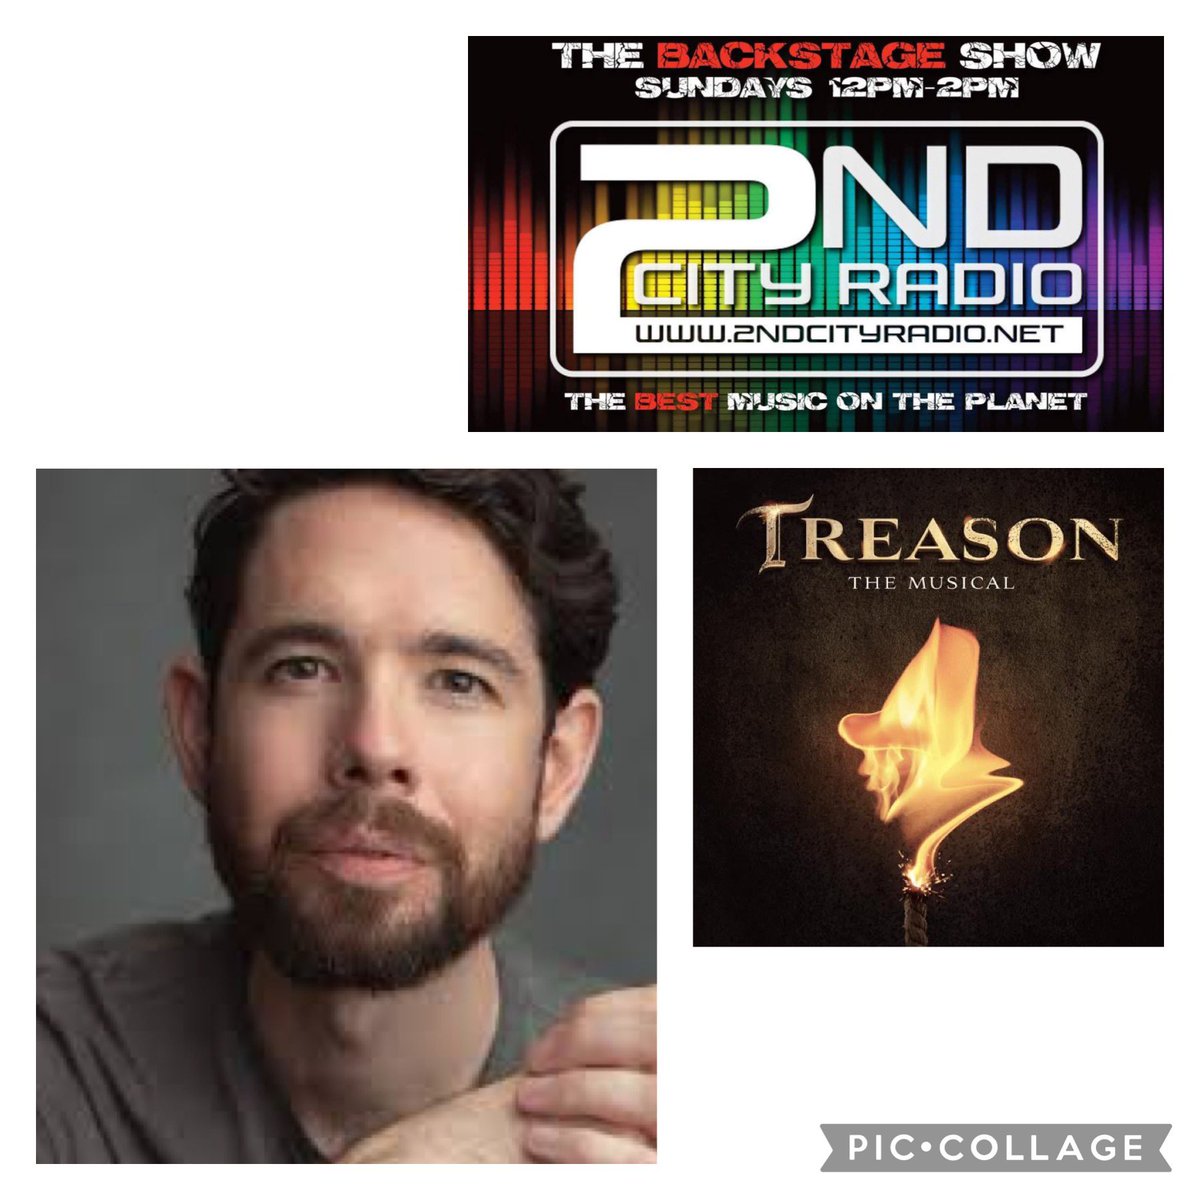 Want to hear the latest news on @TreasonMusical then tune into #Backstage @SECONDCITYRADIO live at midday on Sunday and hear from creator @RickyAllanMusic 2ndcityradio.net 
#theatre @EmmaHollandPR #TreasontheMusical